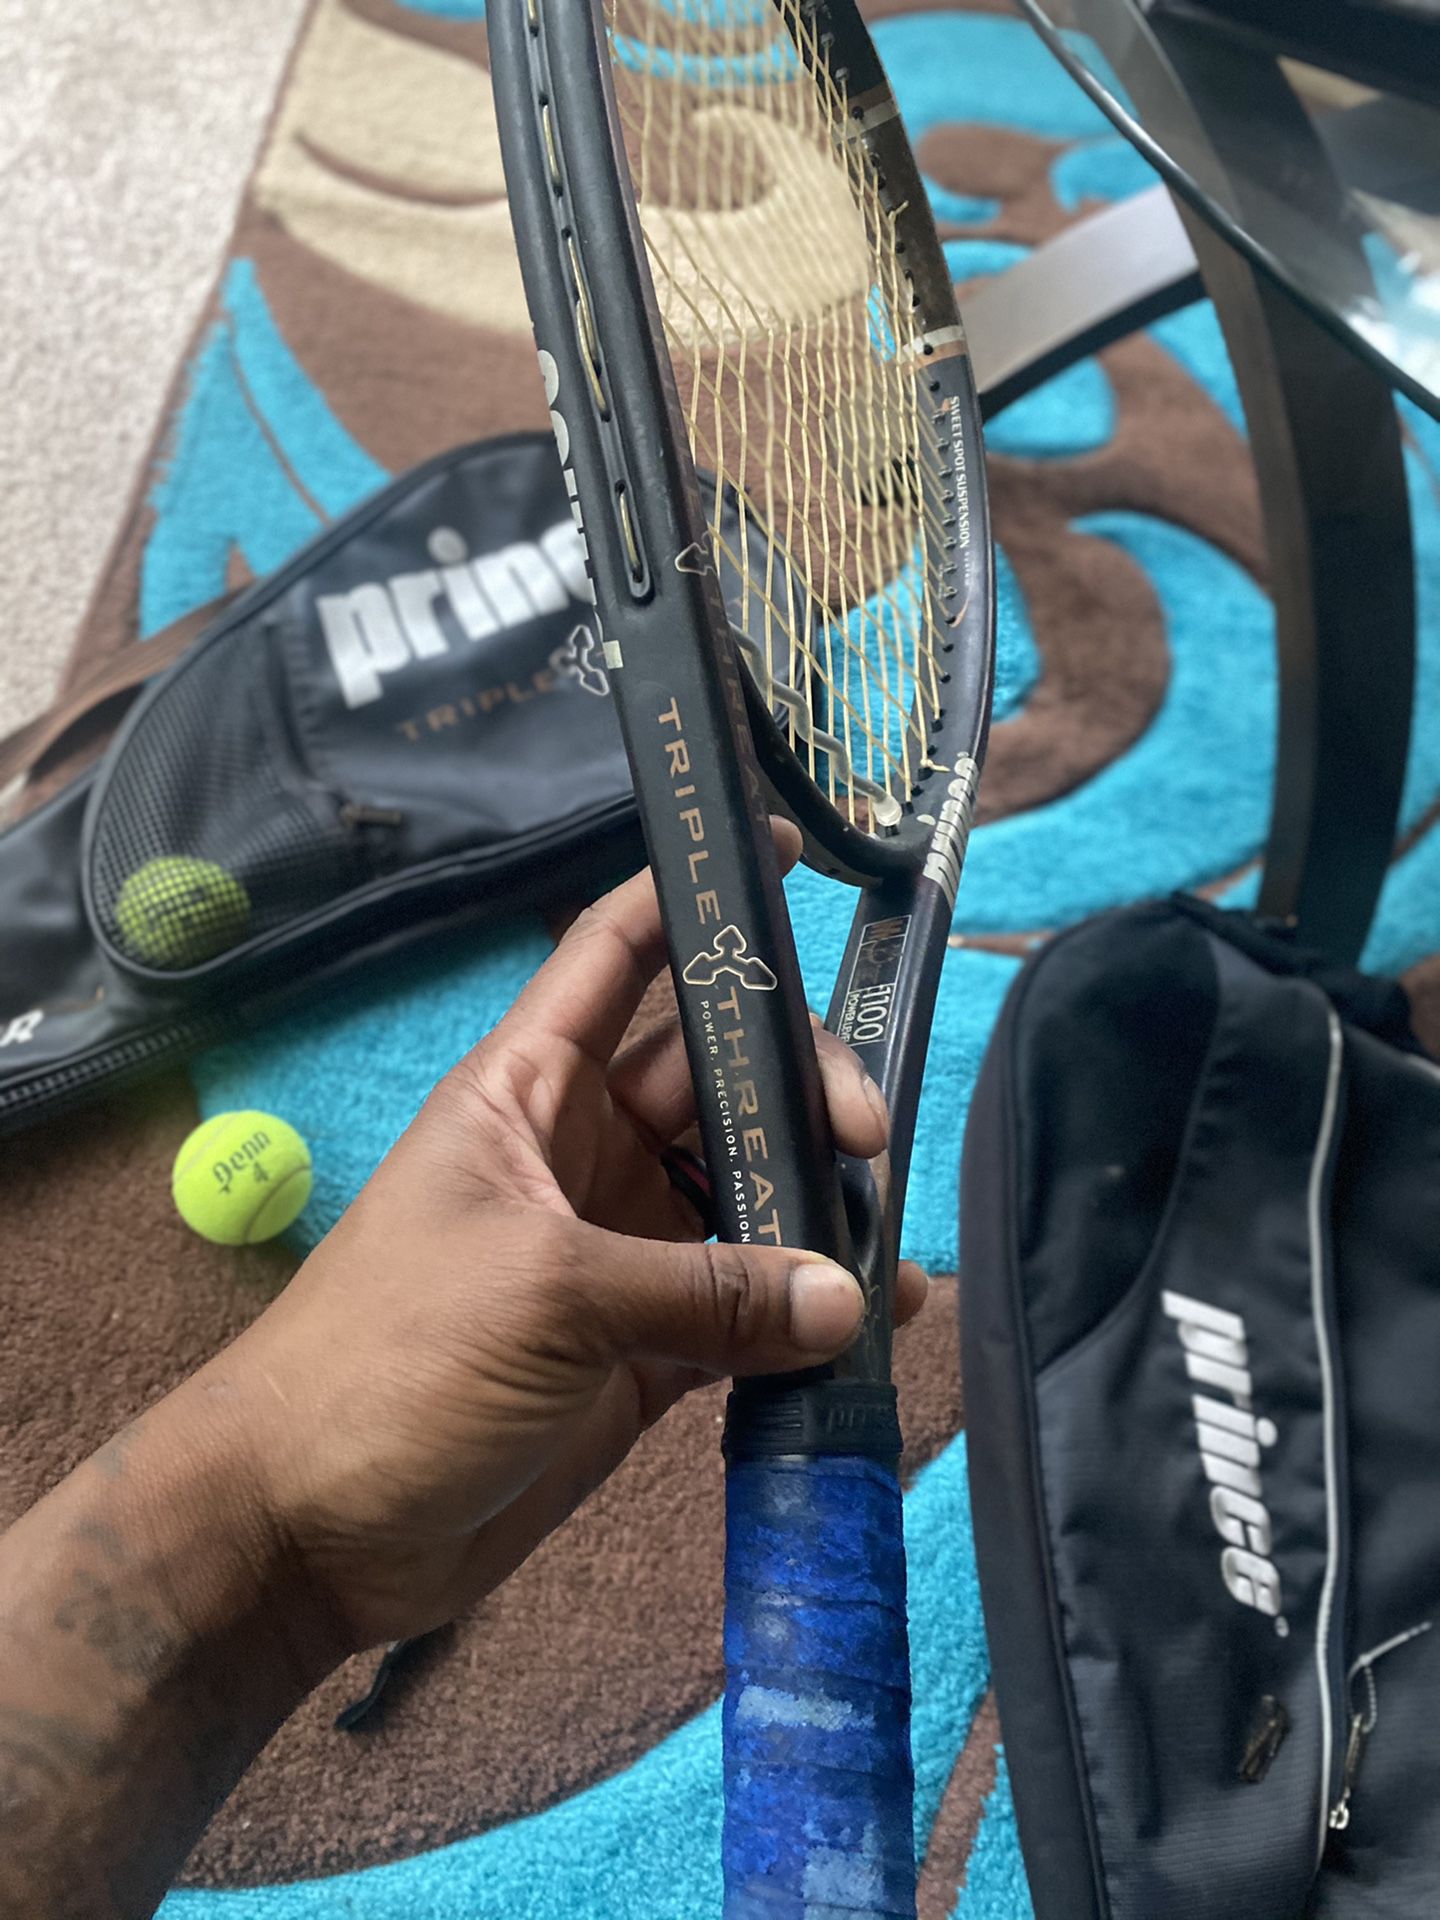 PRINCE Tennis 🎾 racket and 2 carry bags 💼!!! Very good condition!!! Good Christmas 🎄 gift 🎁!!!! Black Friday special!!!